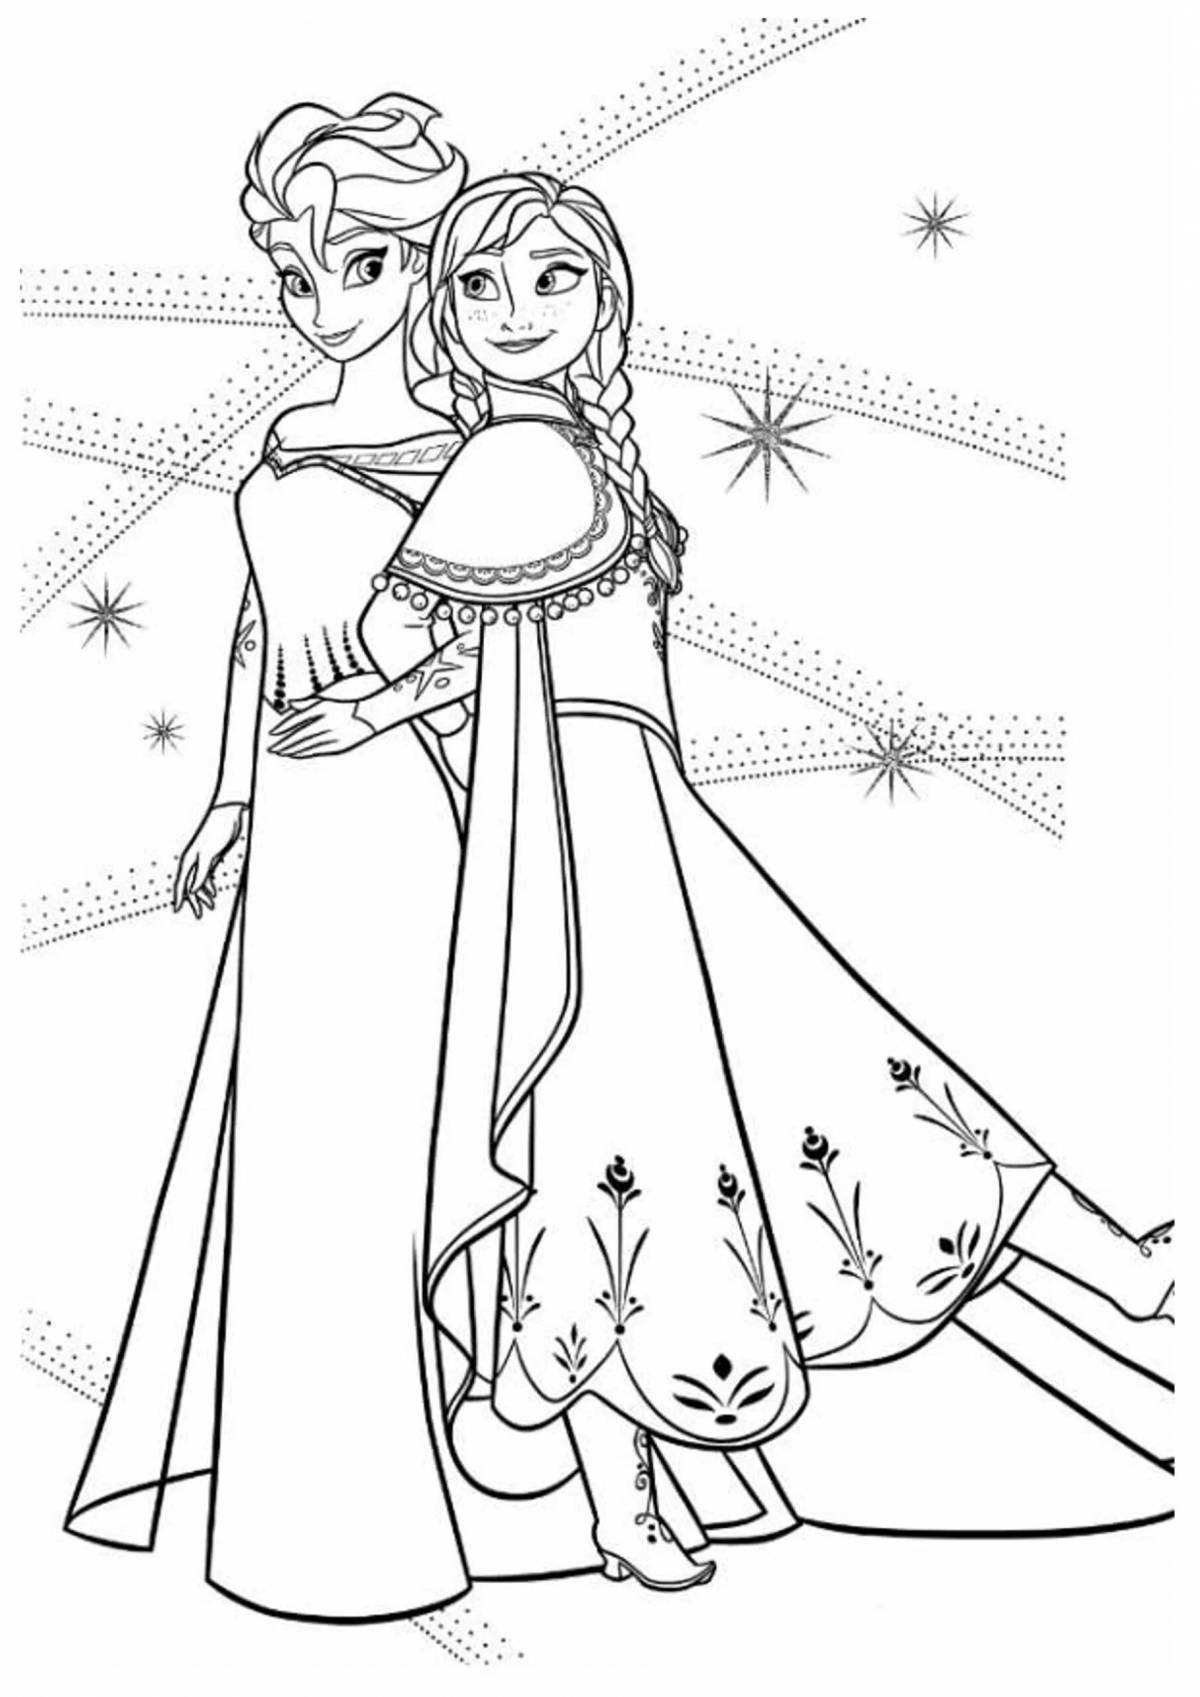 Frozen coloring page for kids 6-7 years old